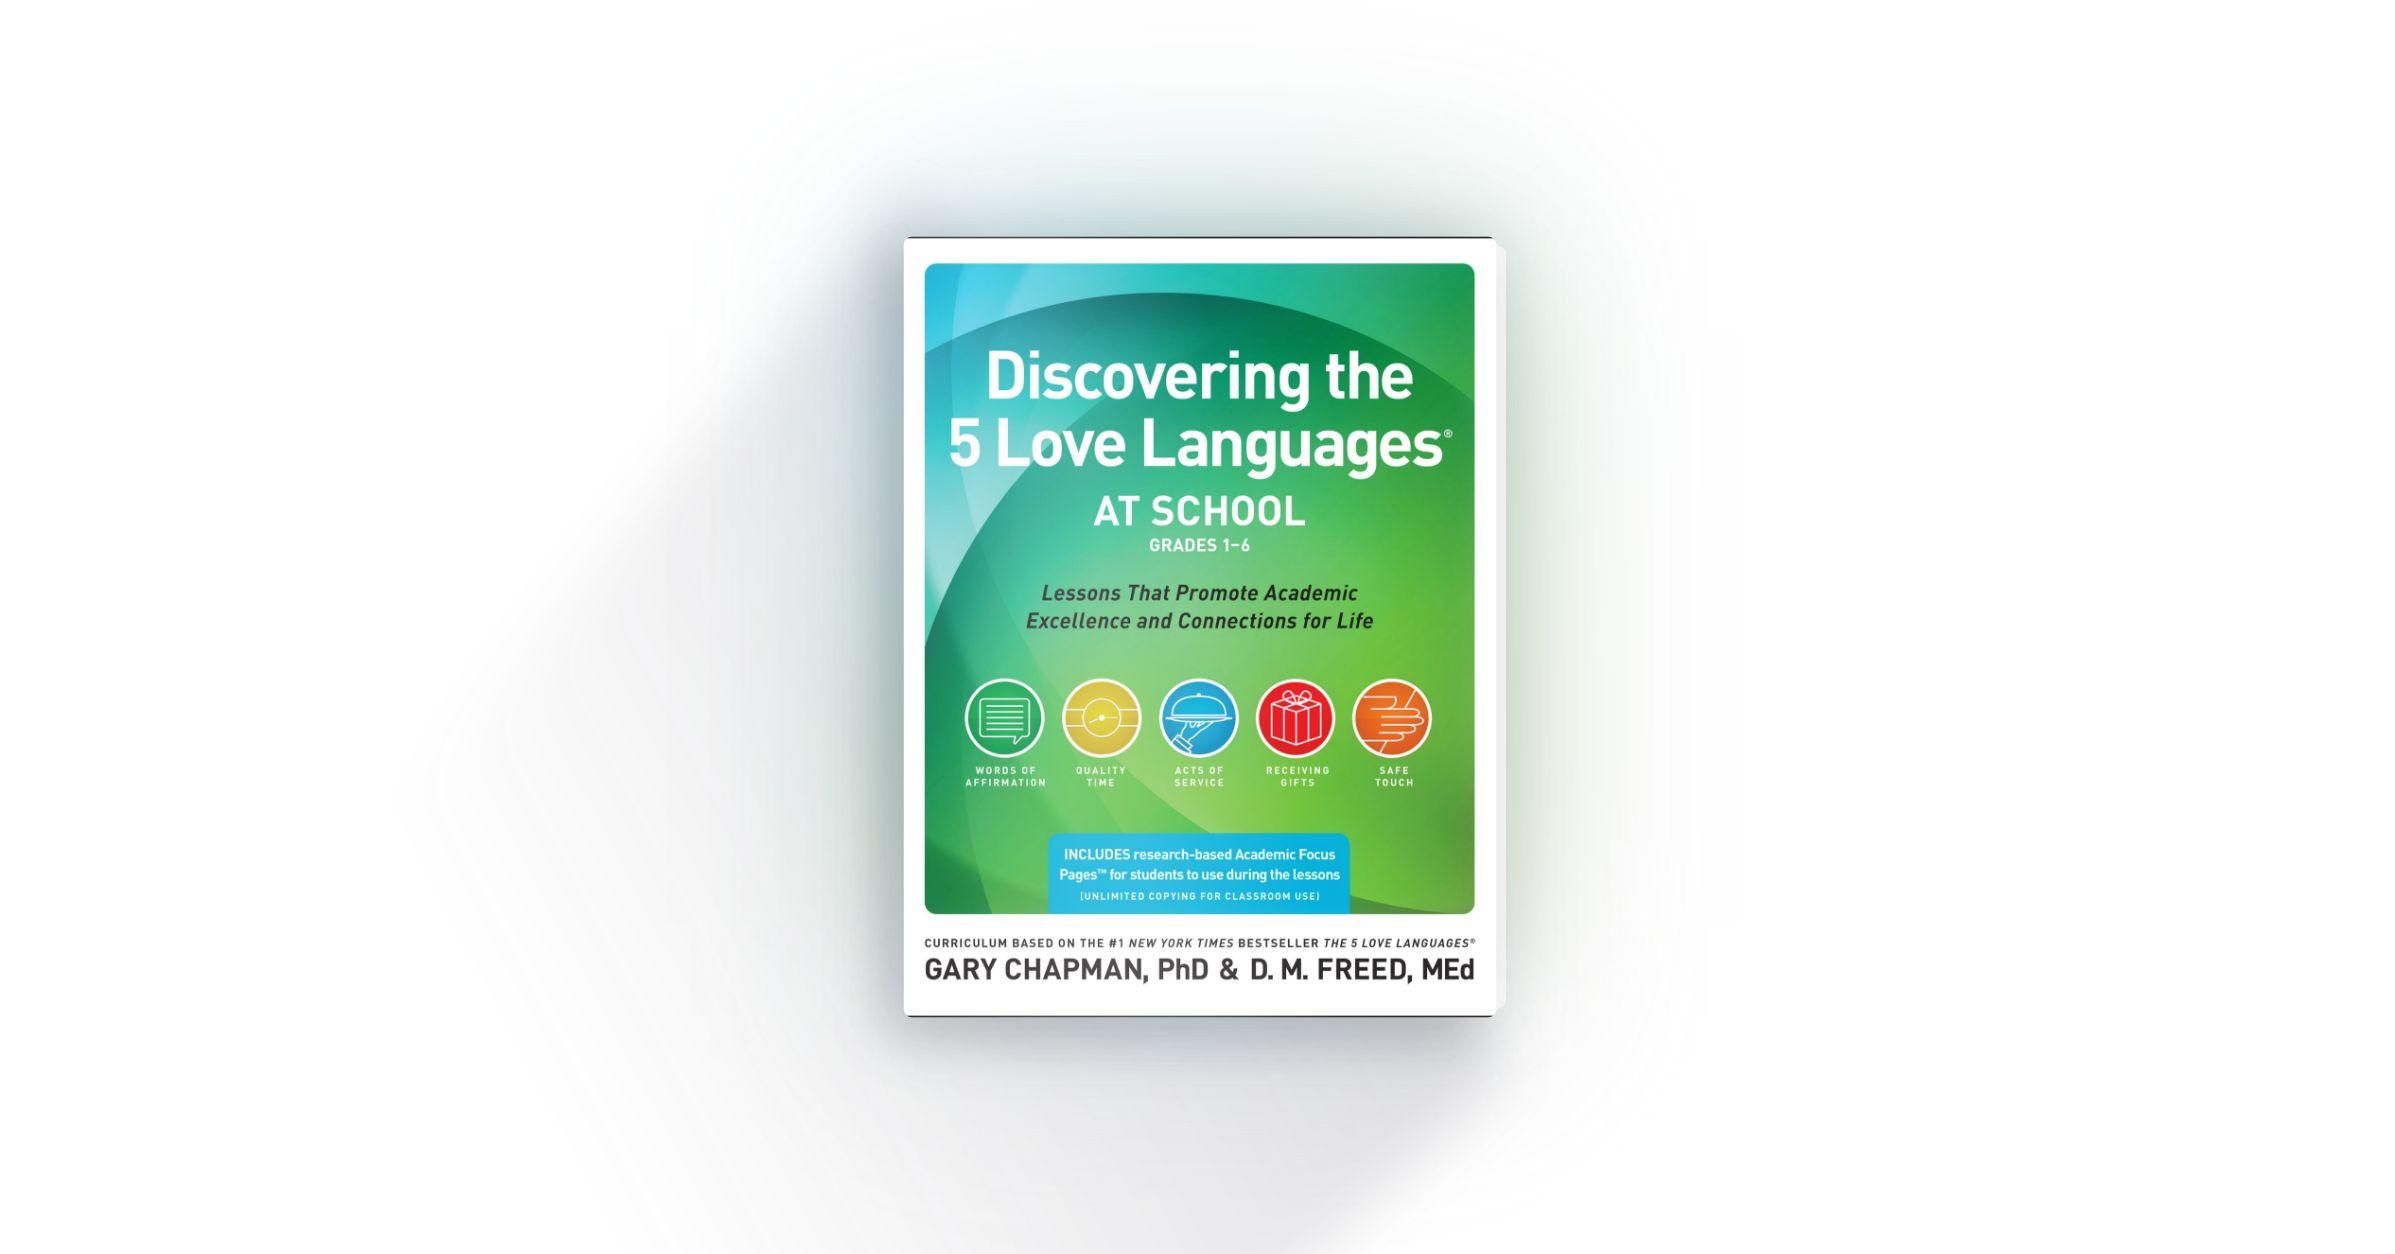 Discovering The 5 Love Languages® at School